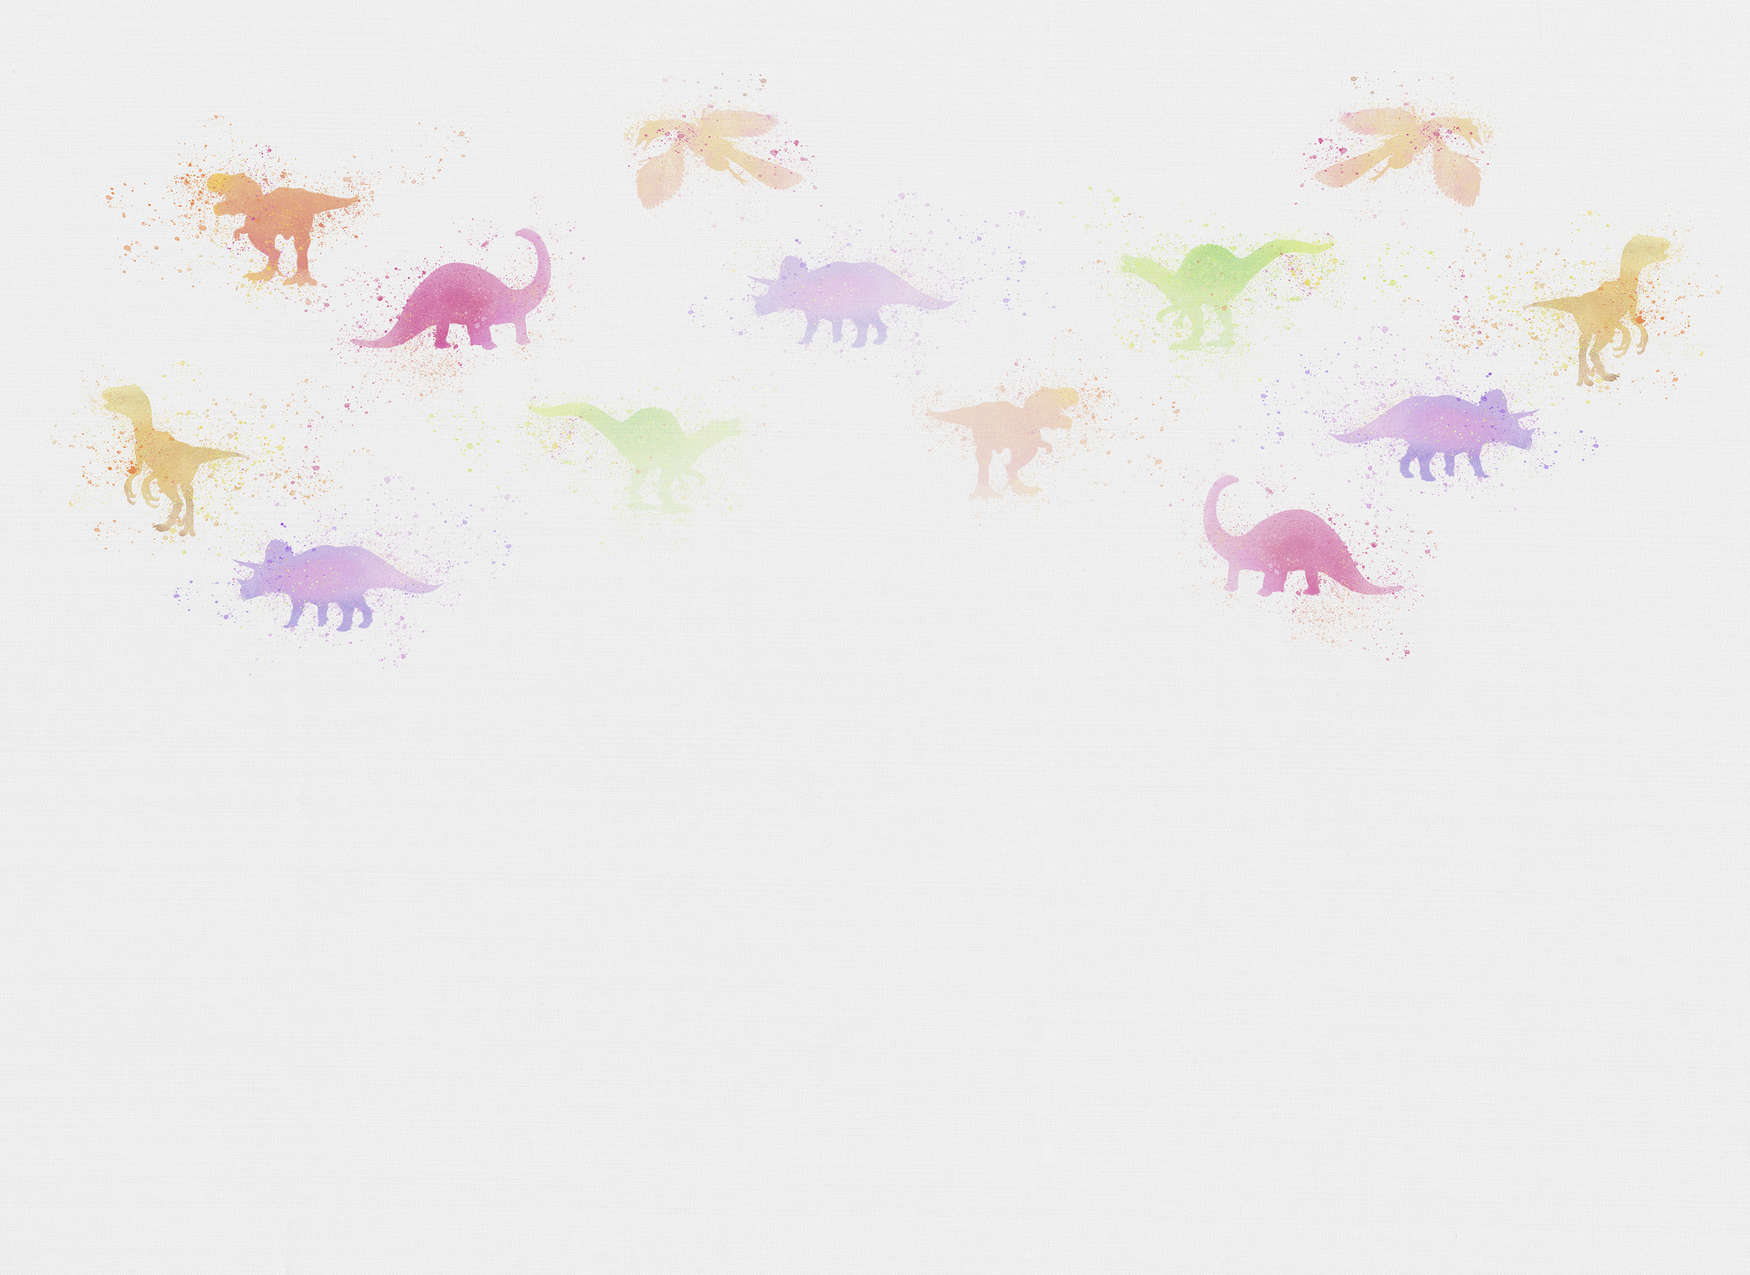             Nursery Wallpaper with Little Dinosaurs - Colourful, White
        